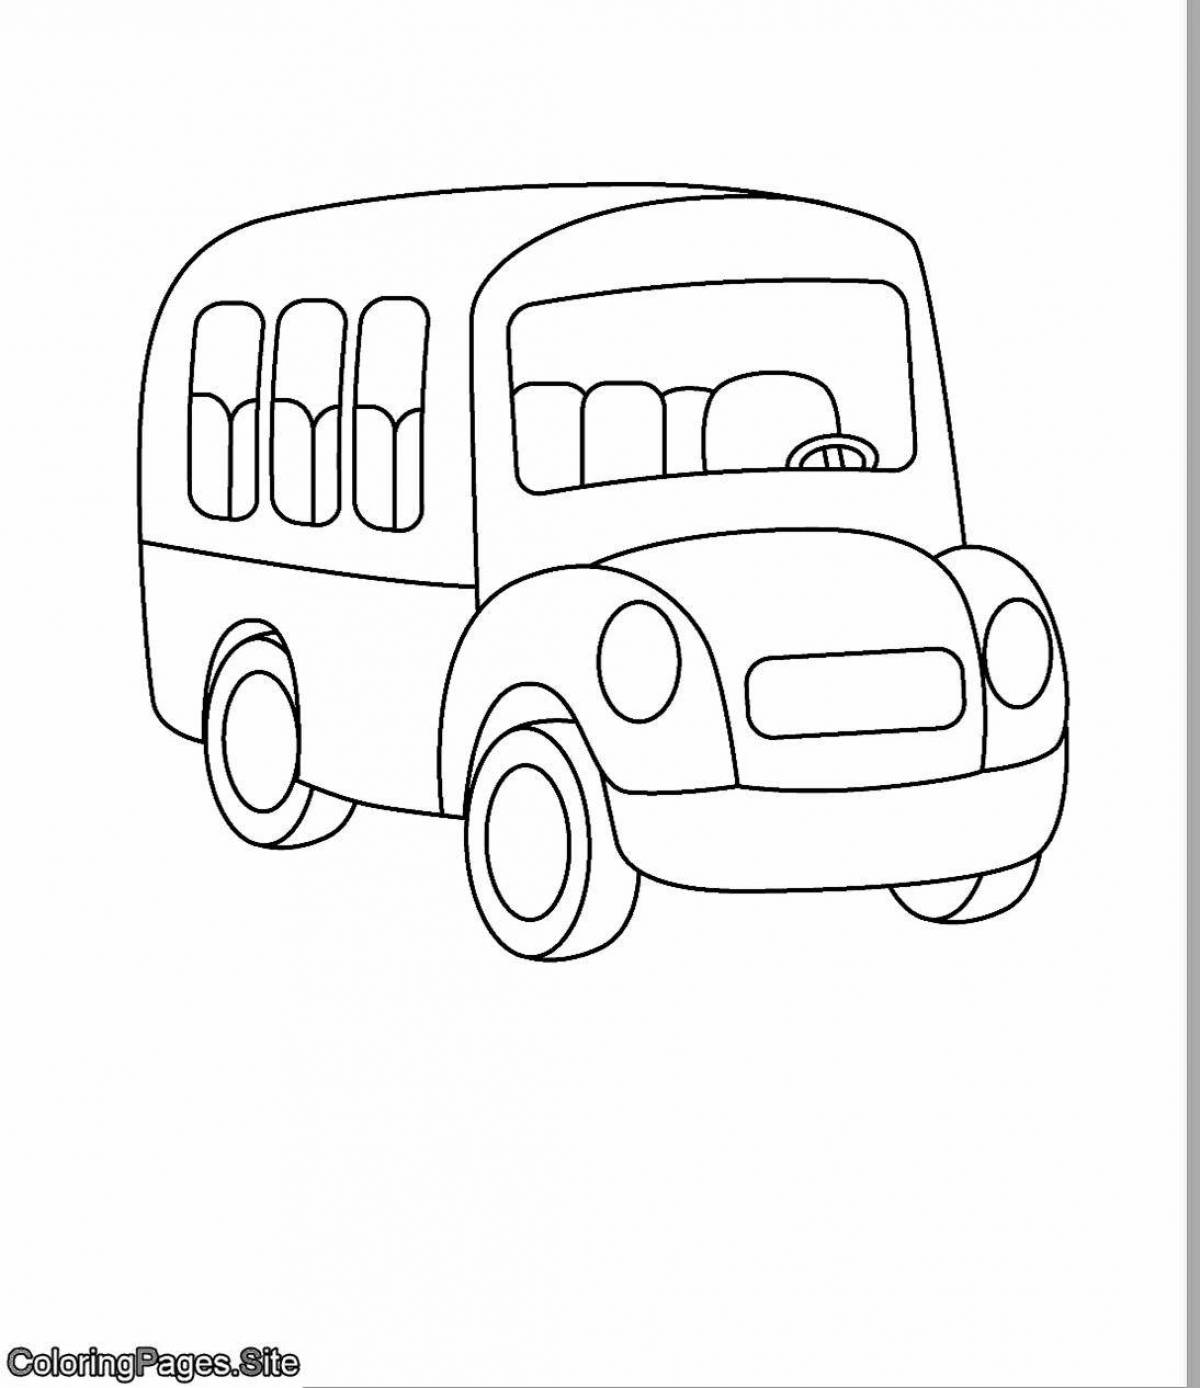 Adorable bus coloring book for 4-5 year olds